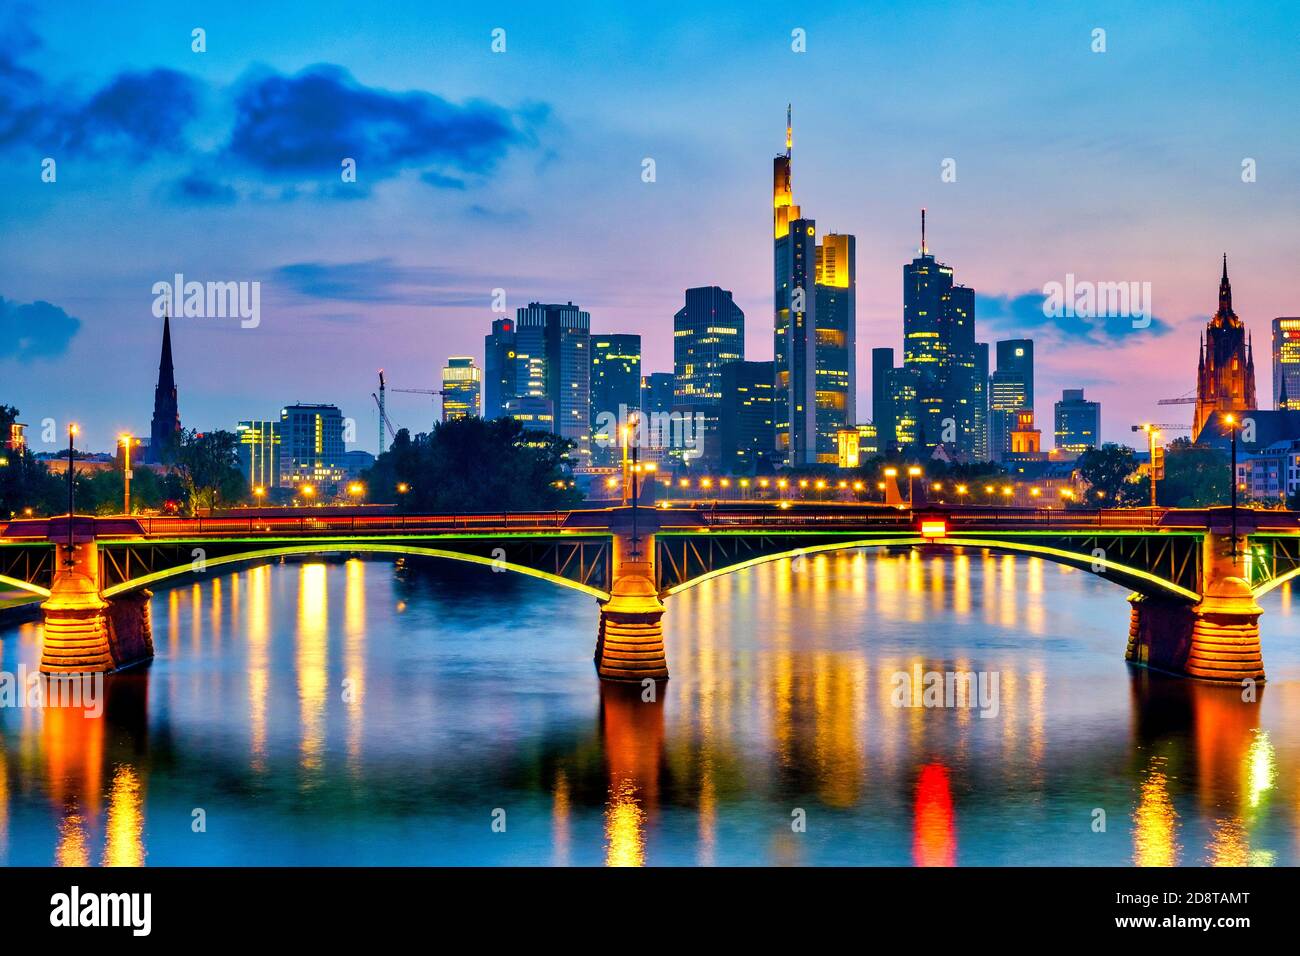 View of the river Main and the skyline of Frankfurt's financial district from the Flößerbrücke, Frankfurt am Main, Germany Stock Photo